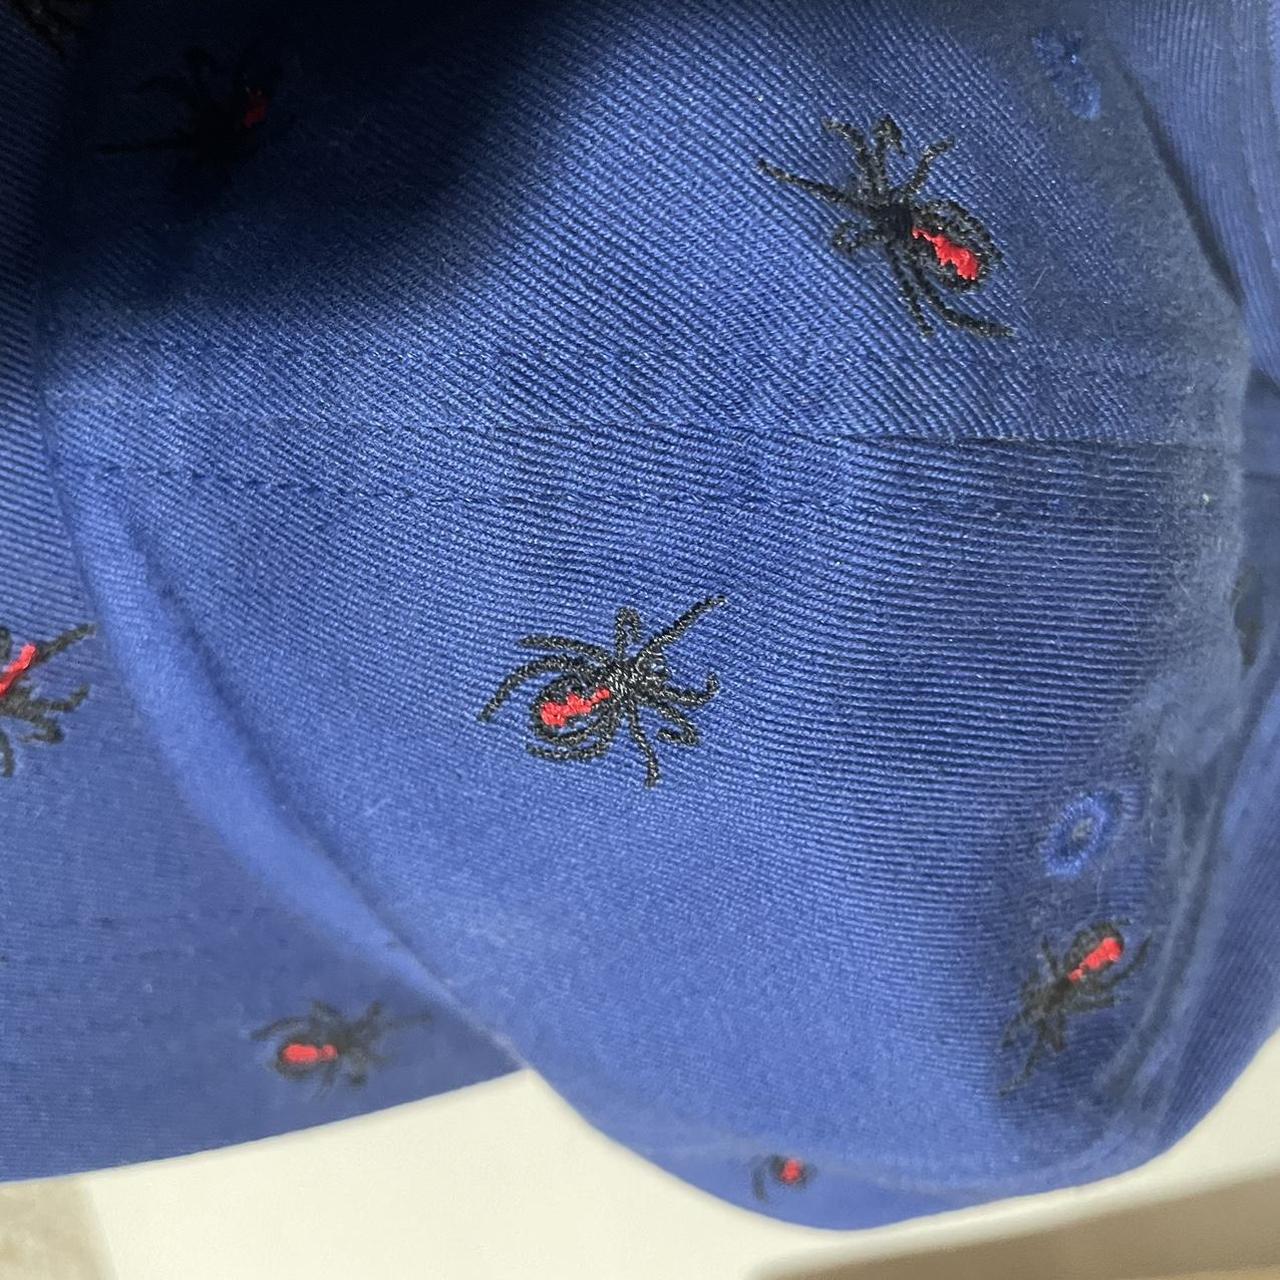 Supreme spiders embroidered 6 panel hat blue, I think